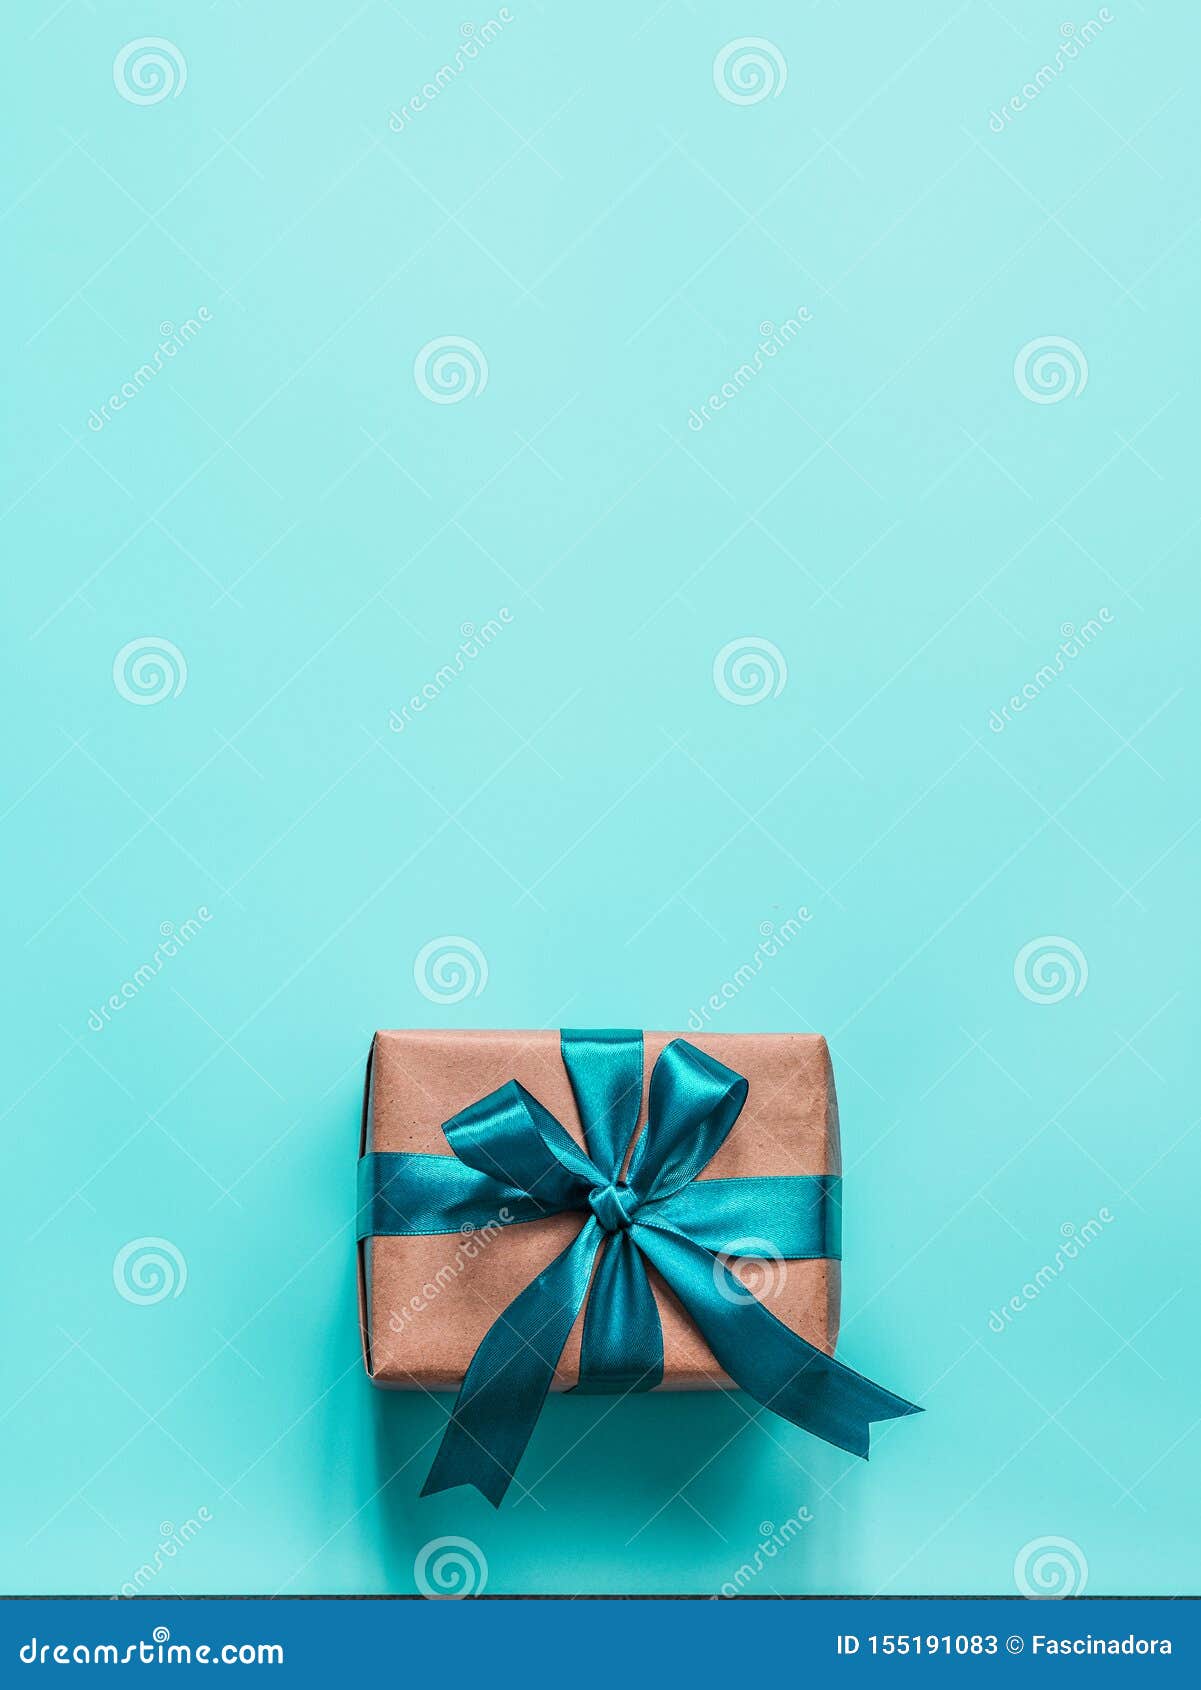 Gift box in craft wrapping paper and green satin ribbon on white